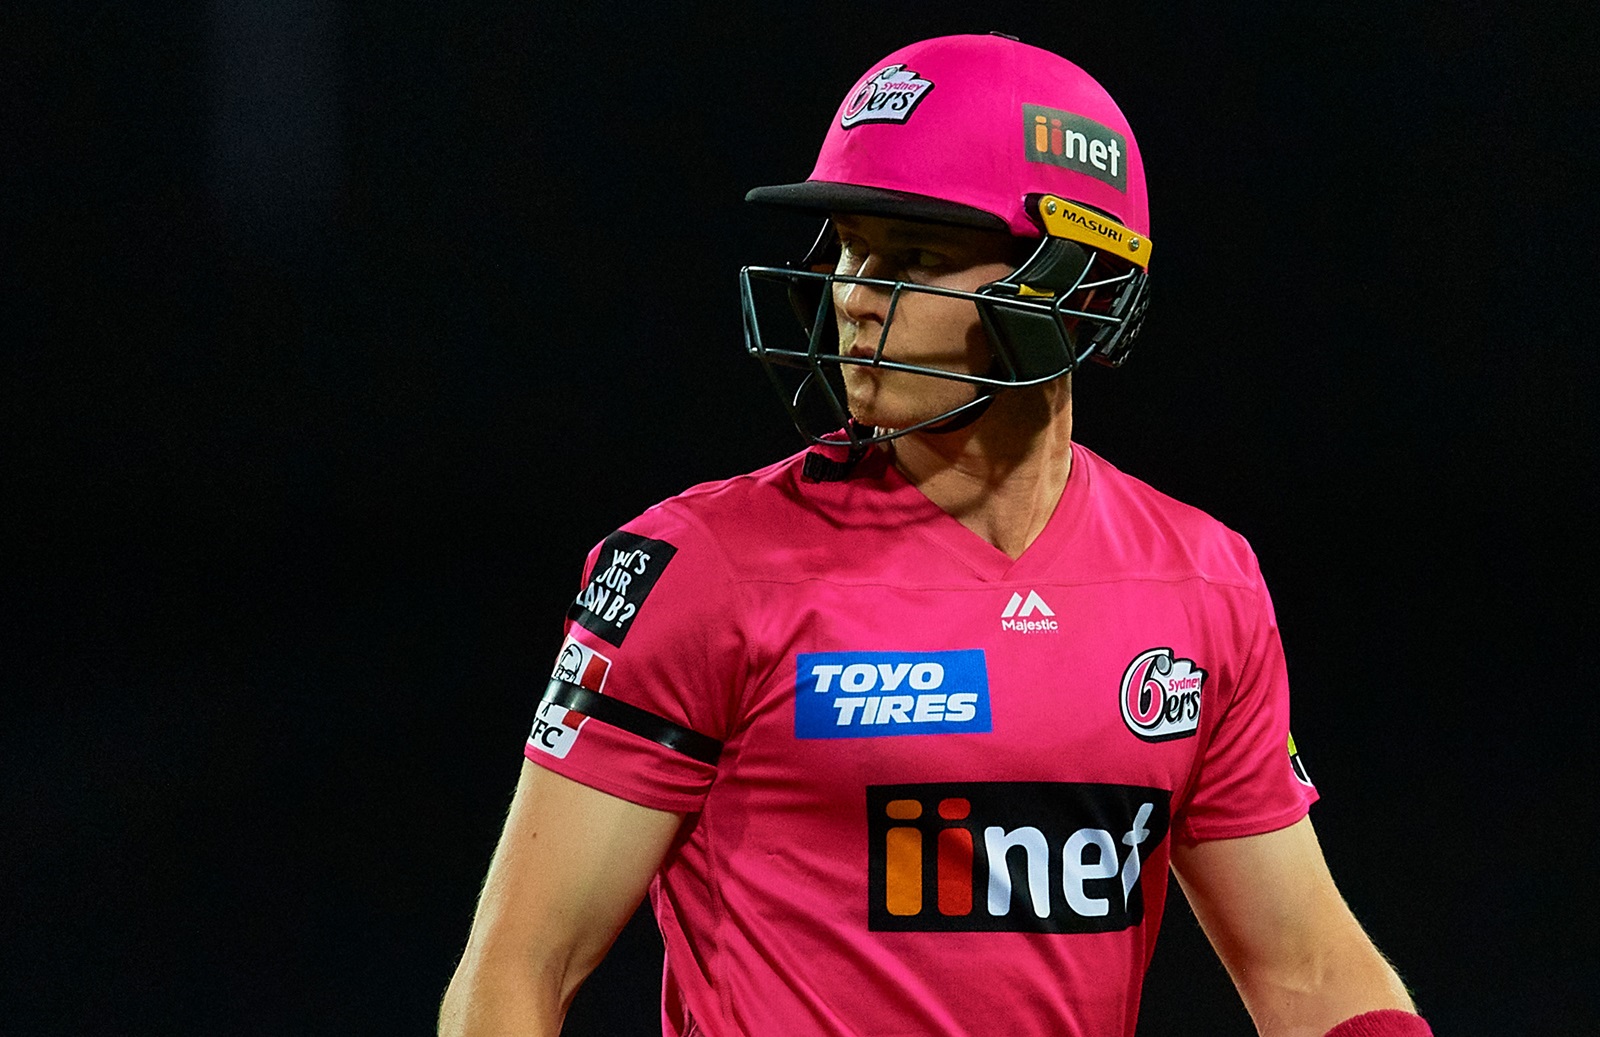 IPL 2022 Auction: IPL hopeful Hayden Kerr slams 58-ball 98 in BBL 2022 playoffs, attracts IPL scouts' attention ahead of MEGA-AUCTION